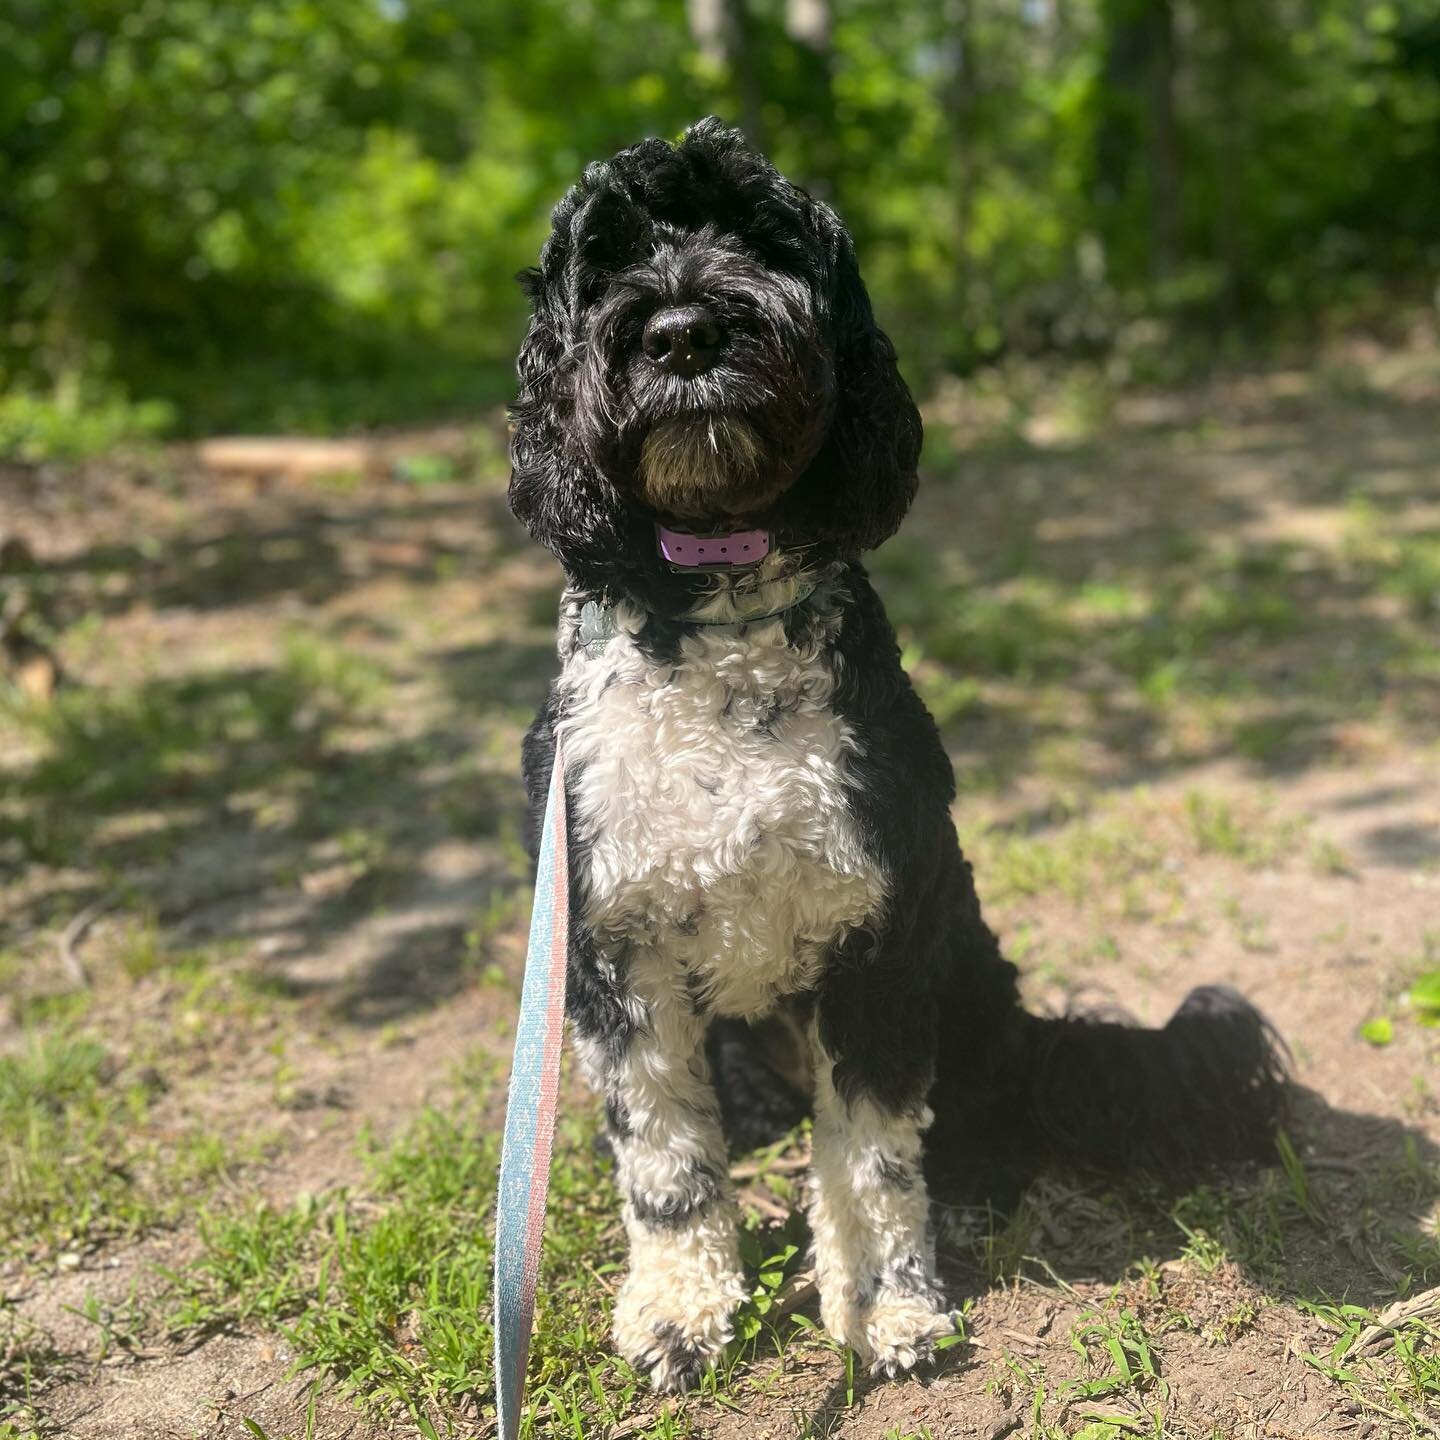 Zo&euml; joined the #housebaironfamily today with a 6-Day-Train Package followed by a 2-week Boarding! 
During her Day-Trains we will work on off leash recalls, in-home manners &amp; more! #portuguesewaterdog #dogtraining #dogtrainer #doglover #newje